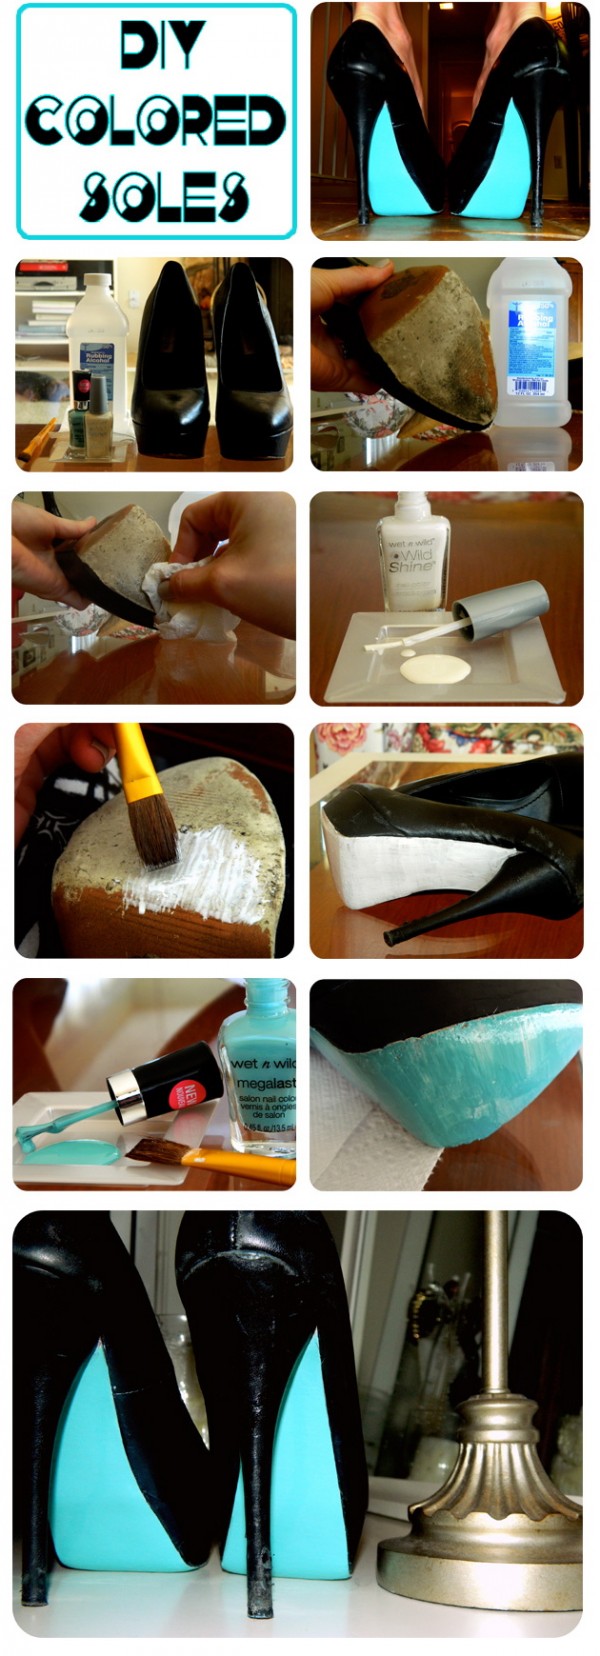 DIY Colored Shoes